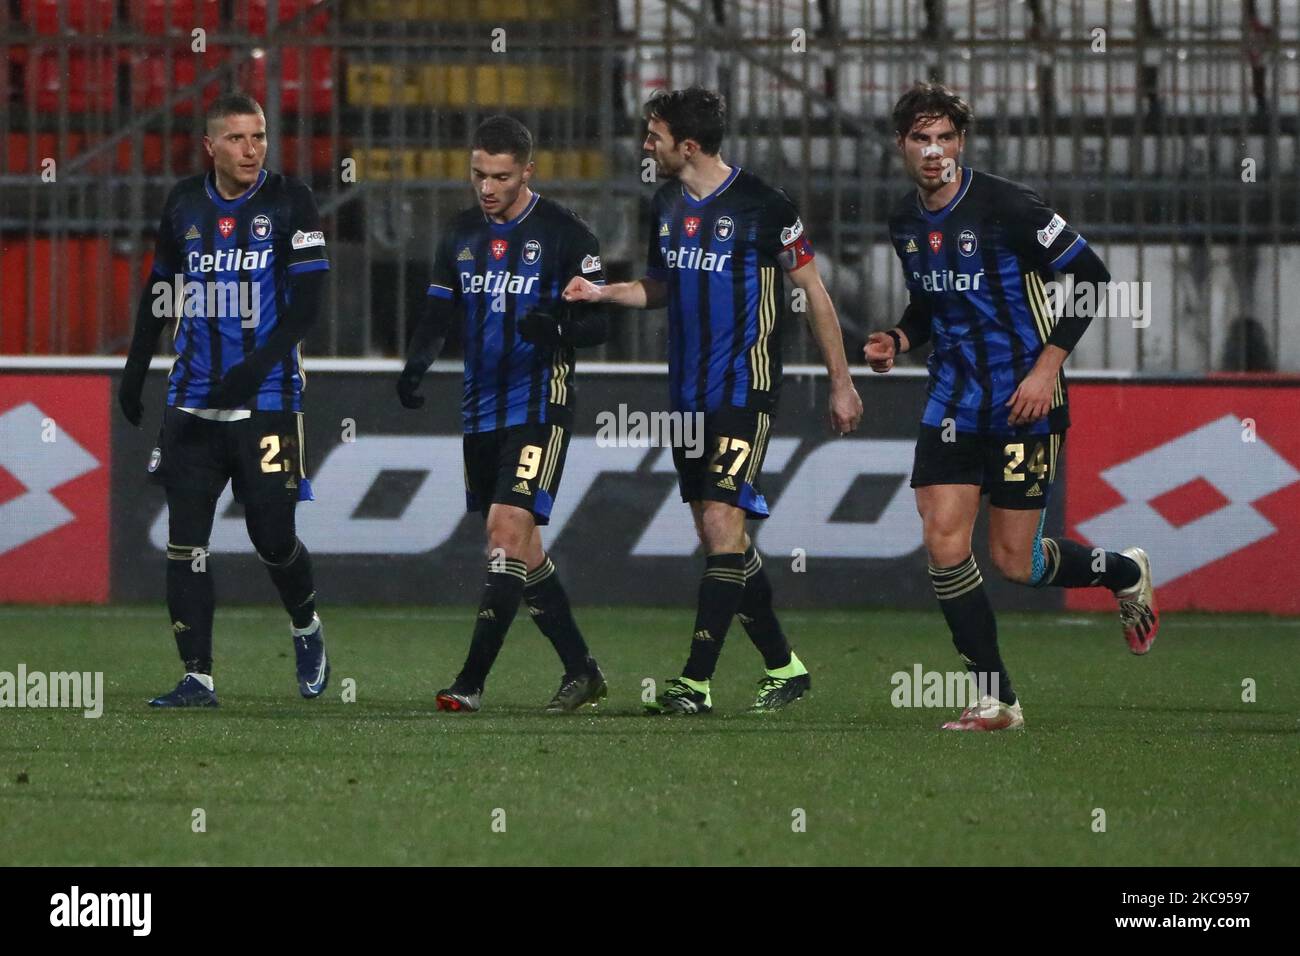 Simone Palombi of AC Pisa celebrate the goal during the Serie B match  between AC Monza and AC Pisa 1909 at Stadio Brianteo on February 12, 2021  in Monza, Italy (Photo by